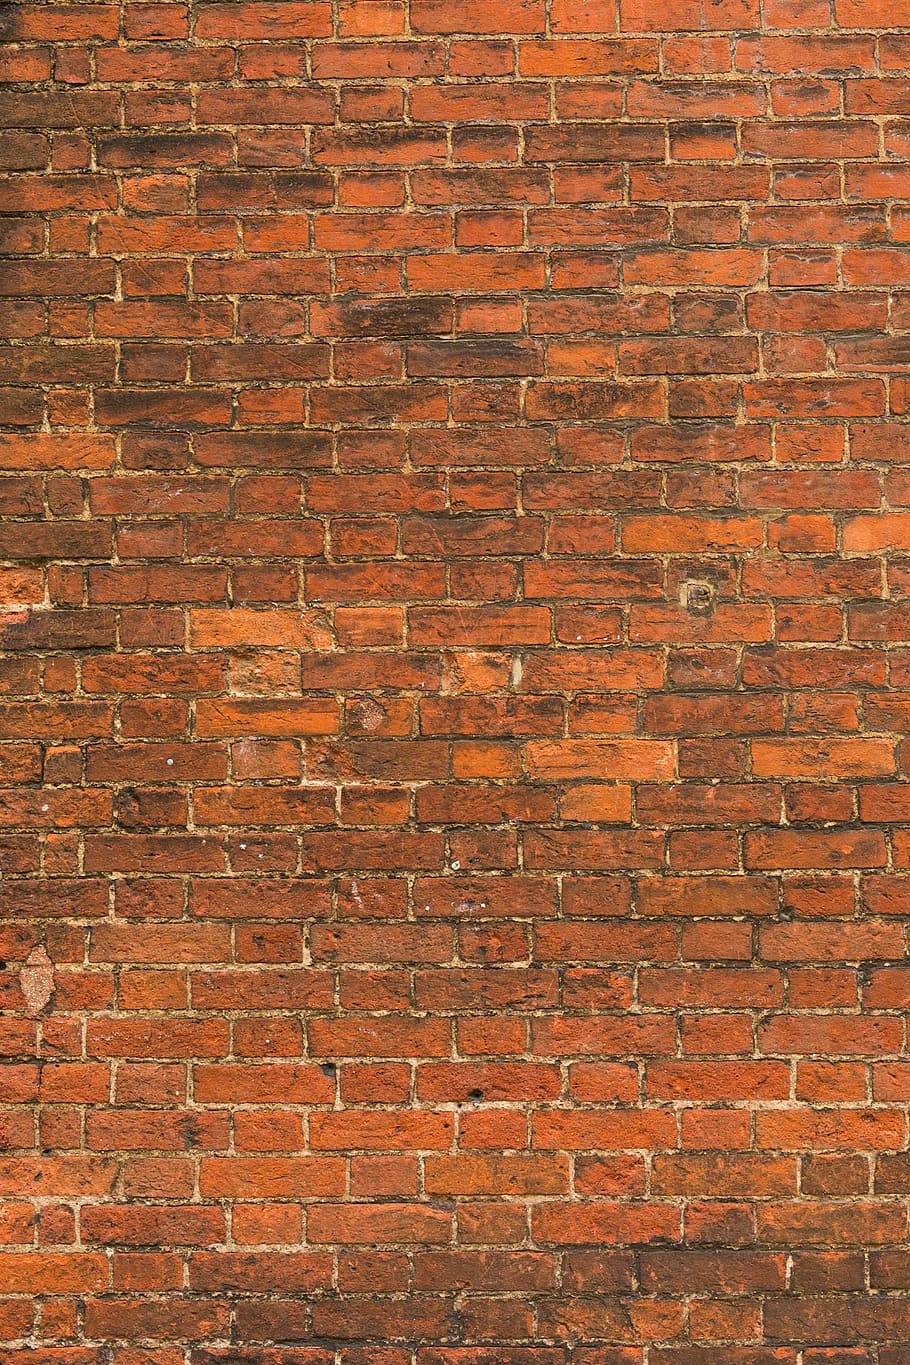 wall, bricks, grout, patterns, textures, orange, brick, brick wall, backgrounds, wall - building feature